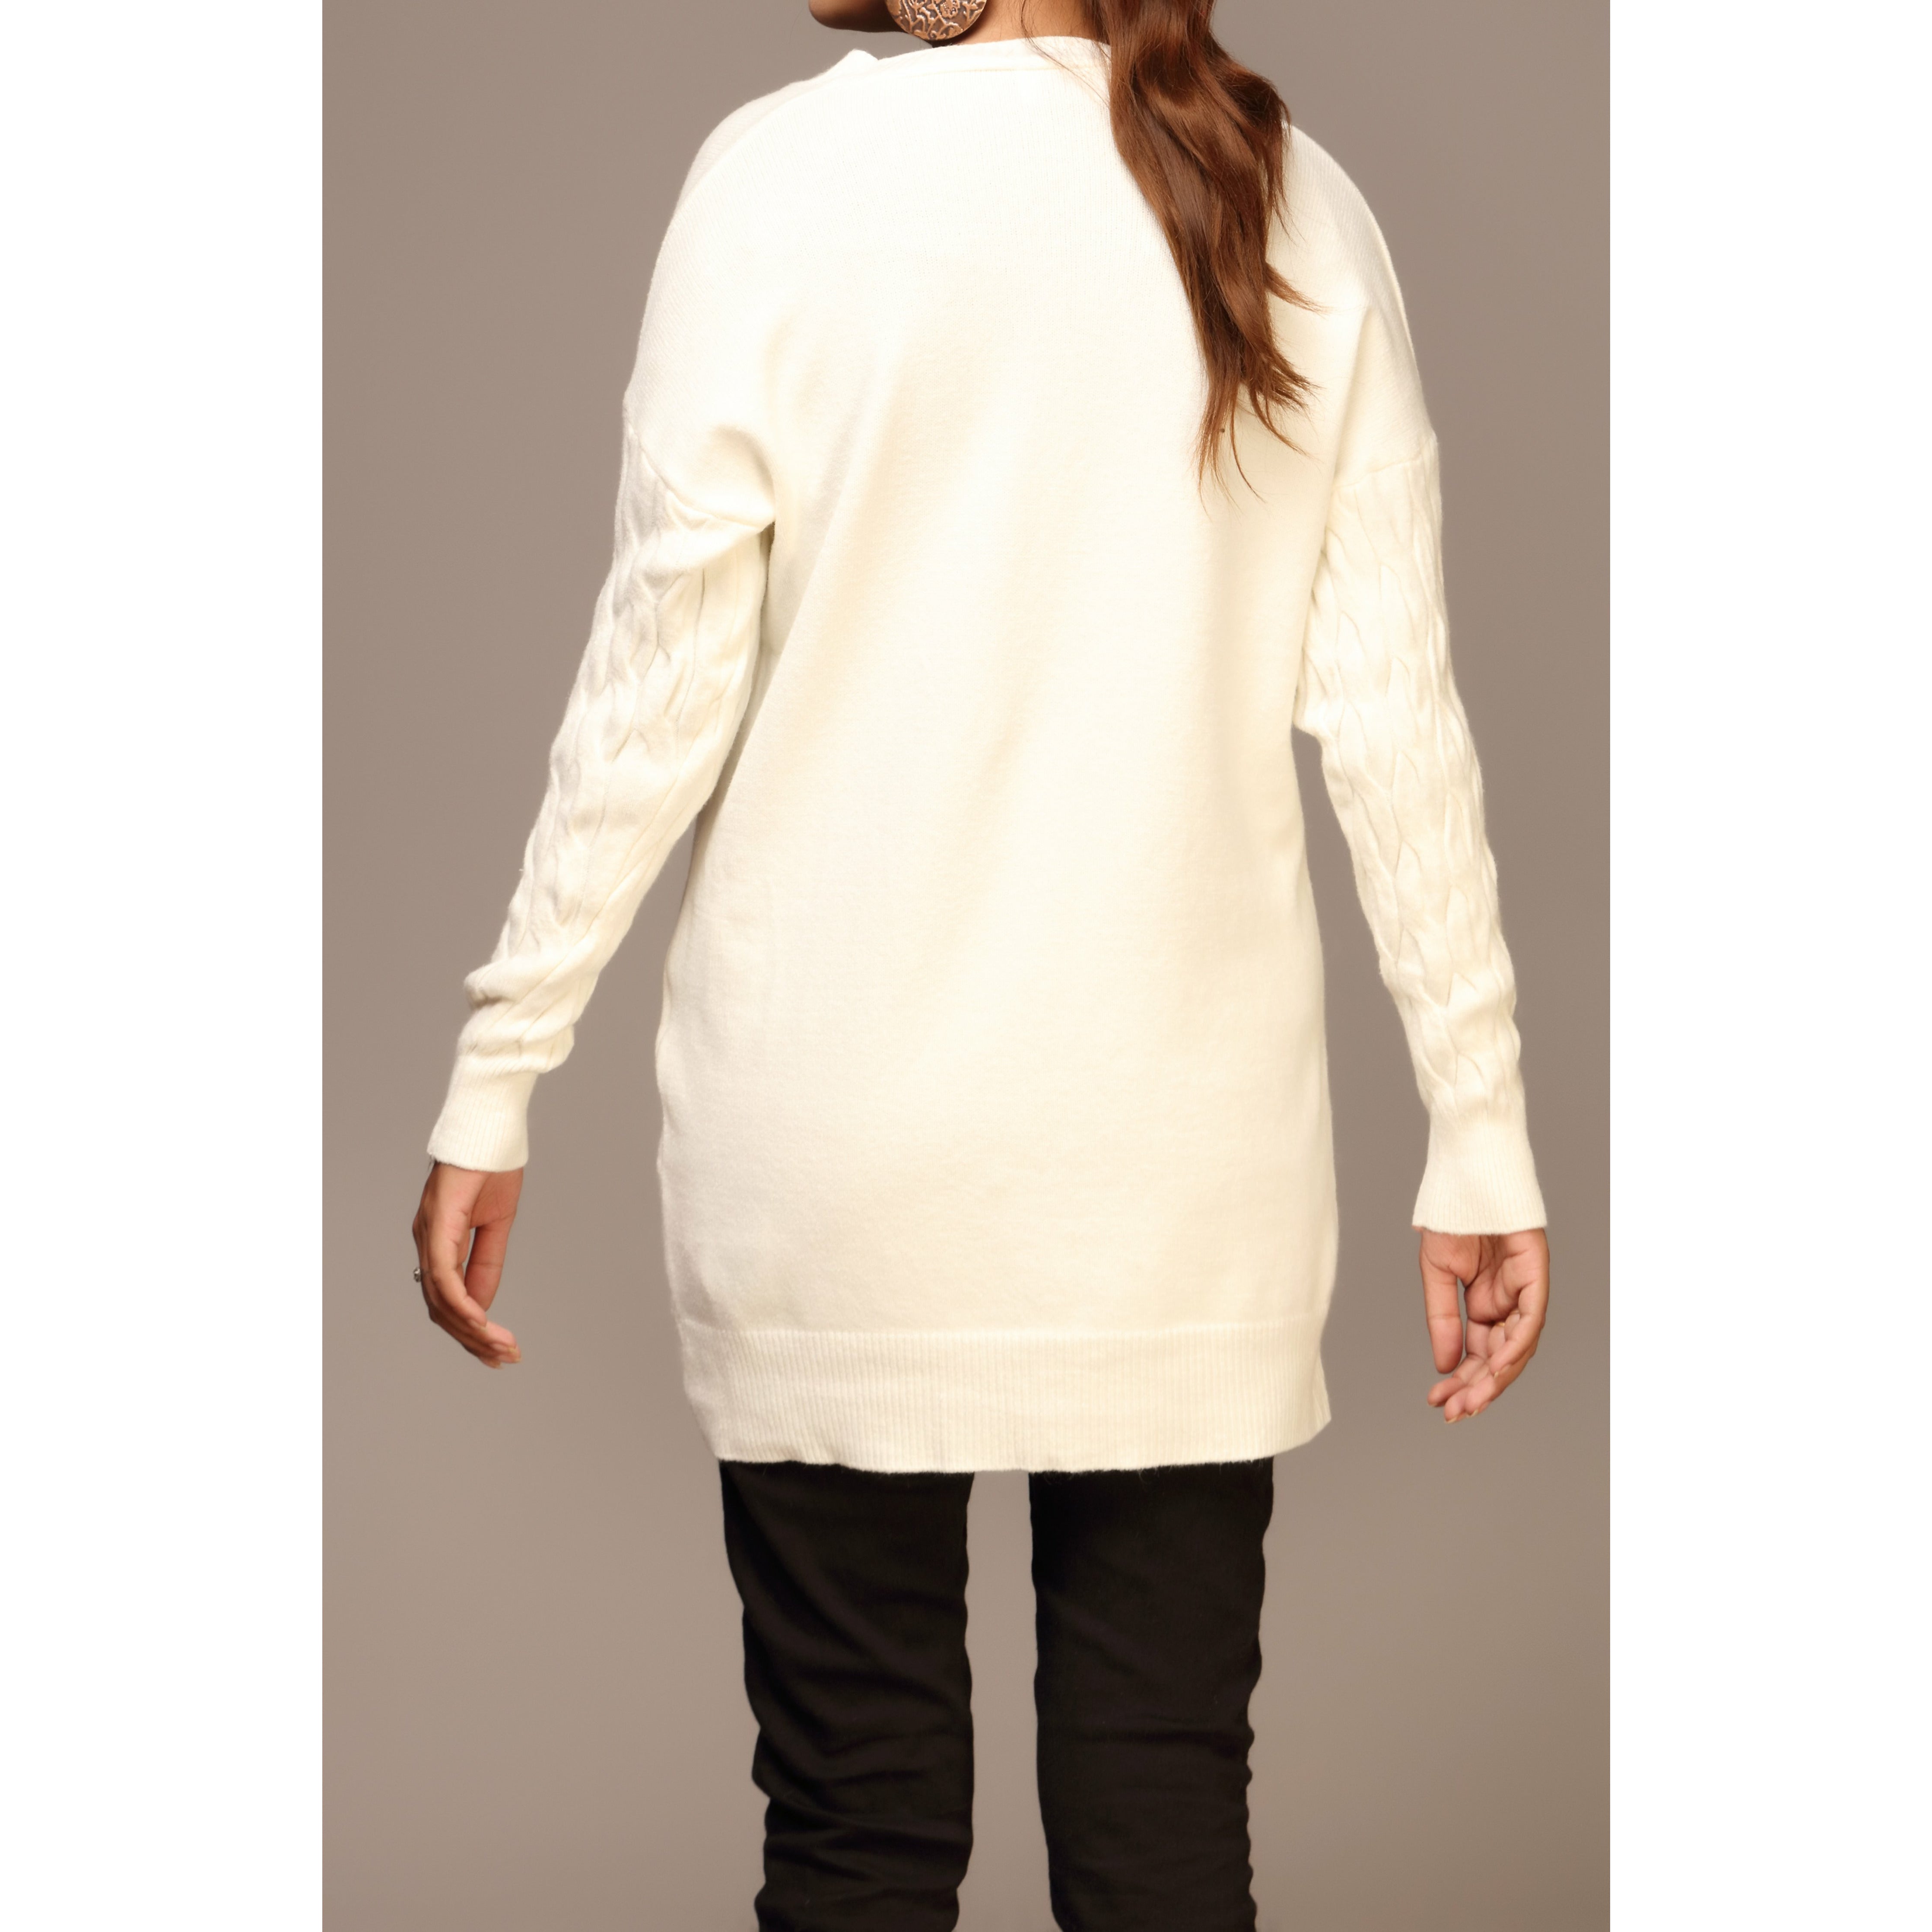 White Color Long Cardigan PW1900